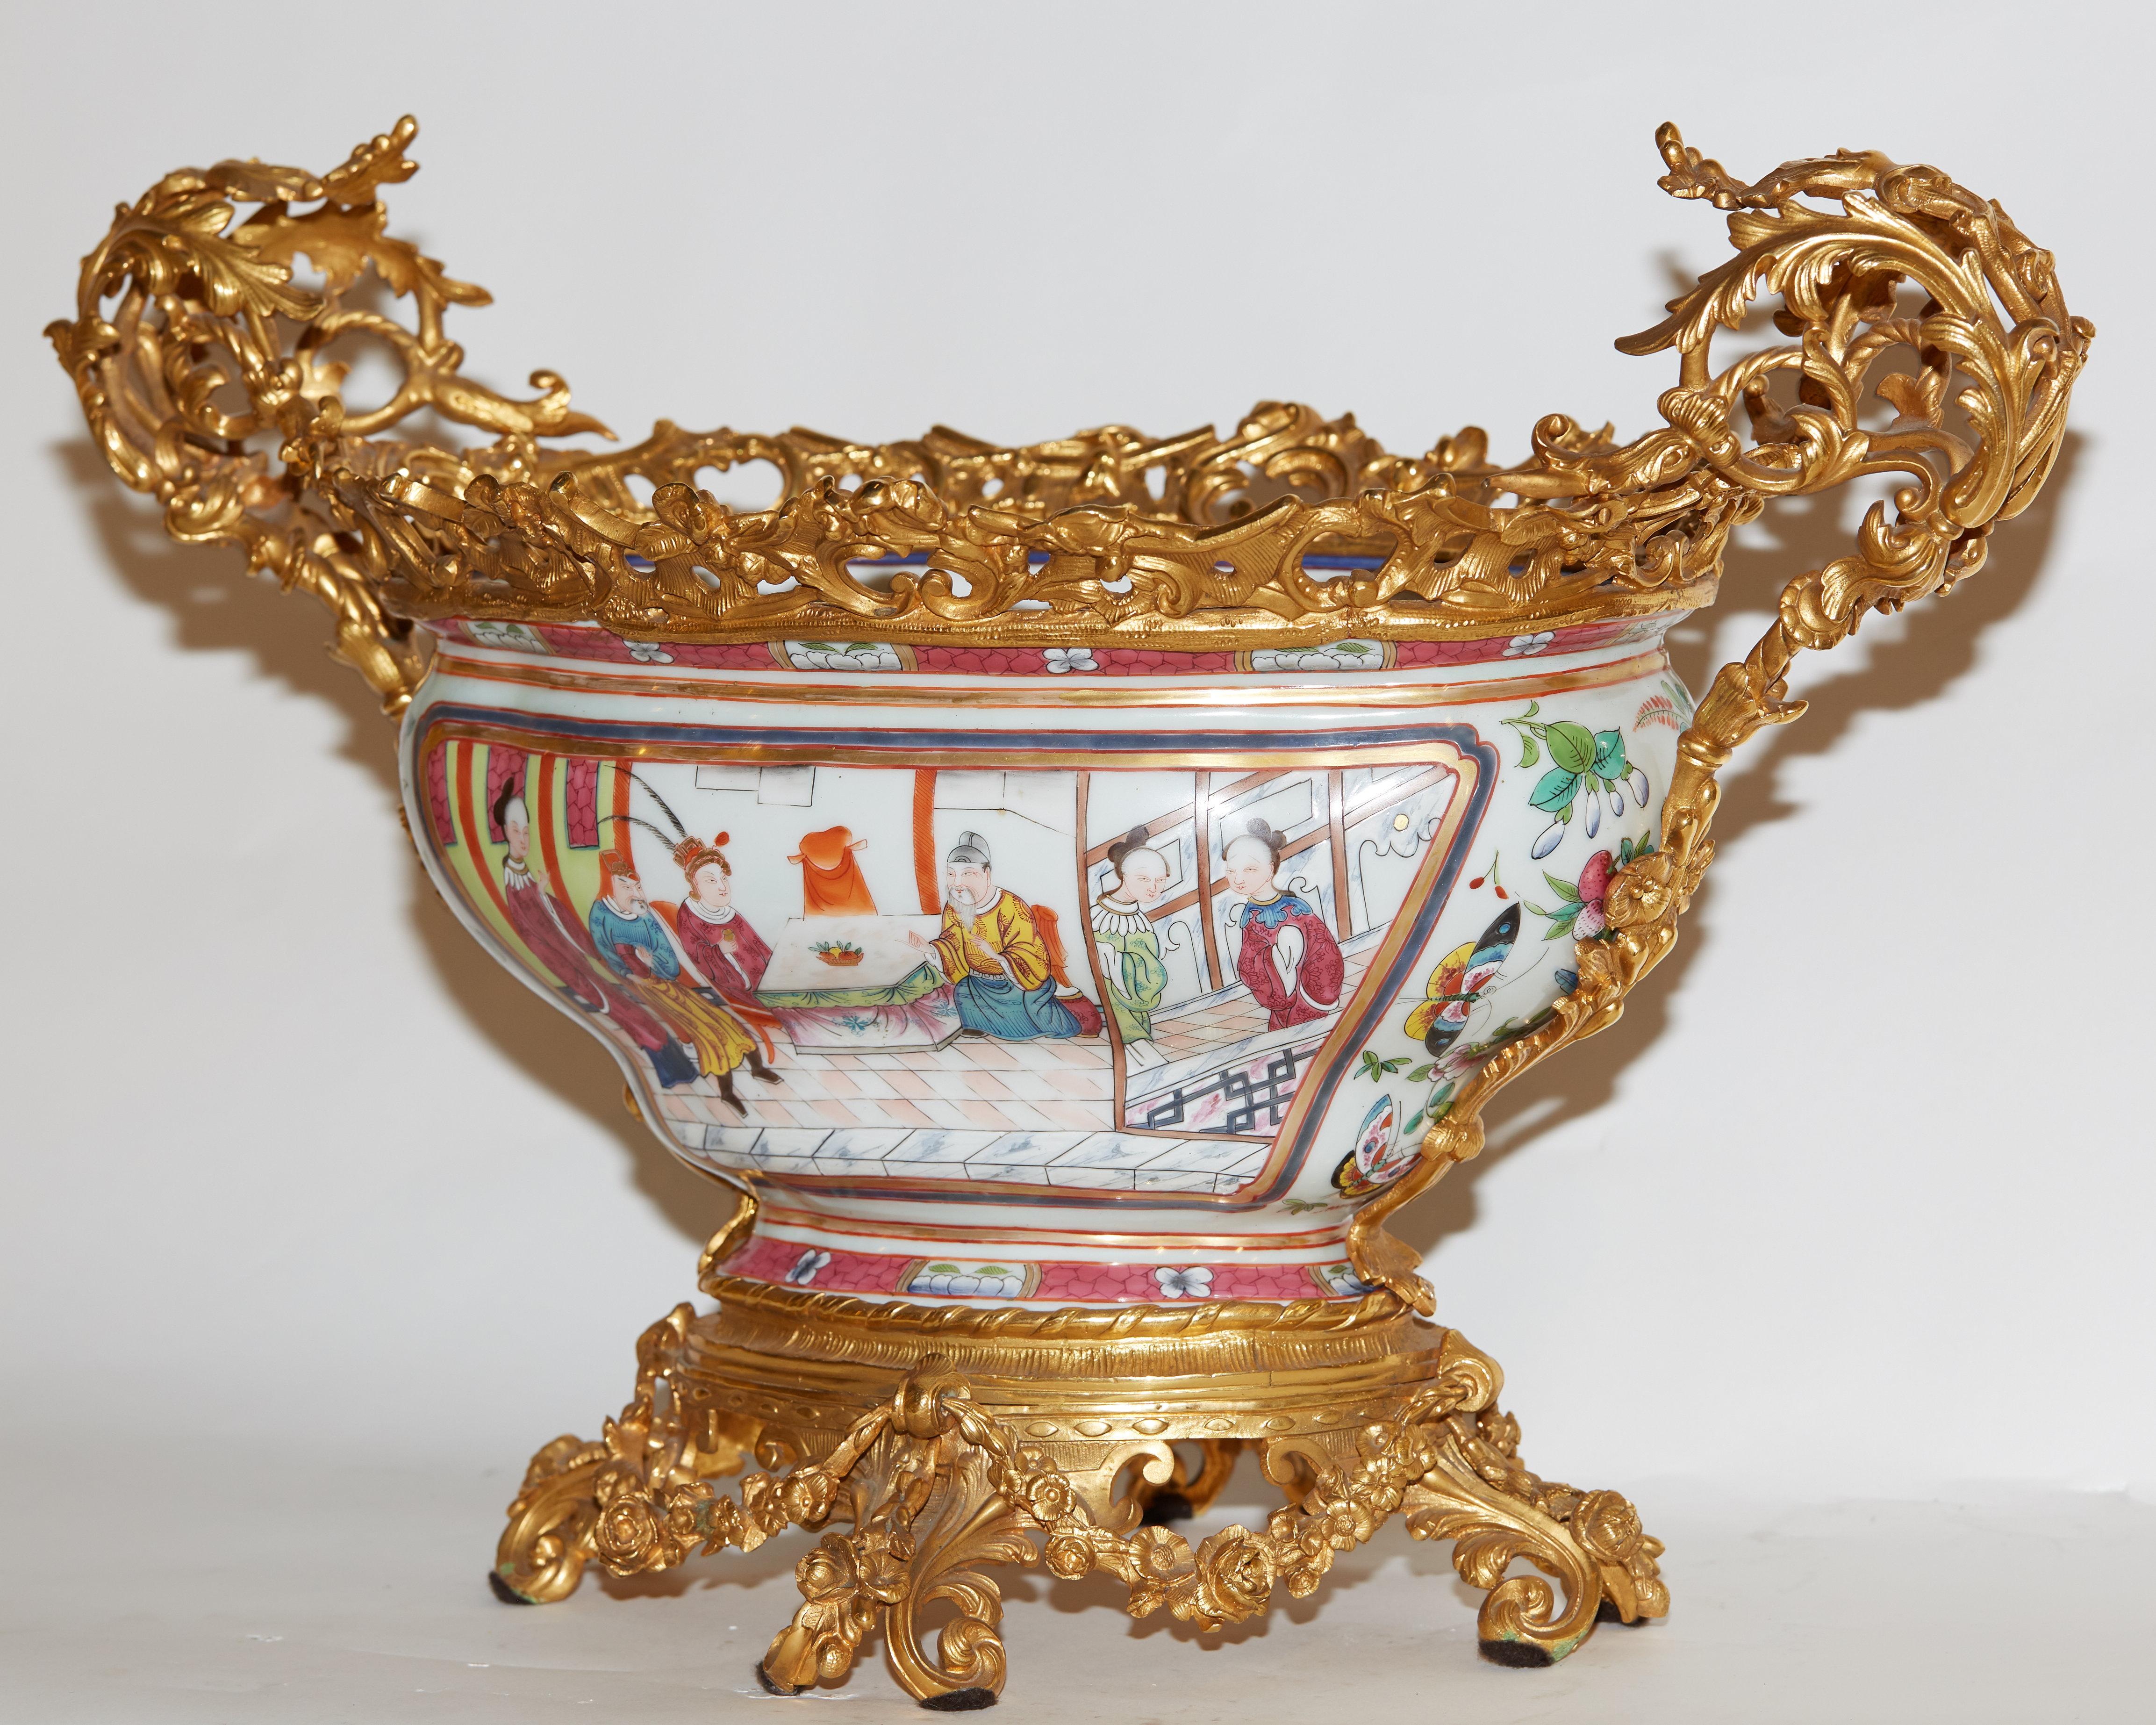 Gilt bronze-mounted Chinese export porcelain bowl with gilt bronze mounts in the 18th century style.